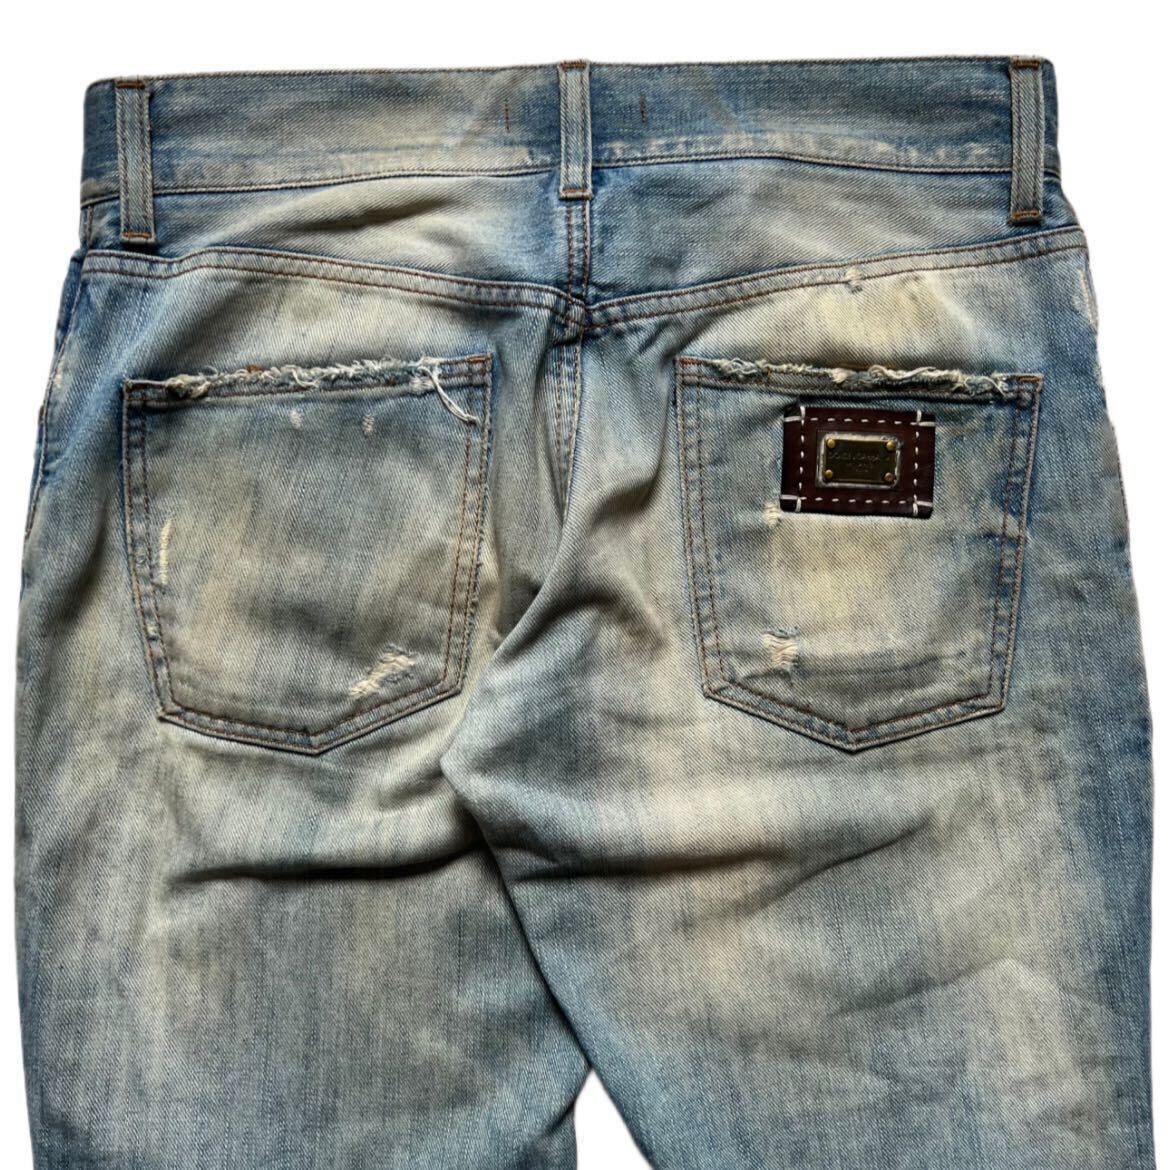 Rare 00s DOLCE&GABBANA distressed denim pants archive collection D&G balenciaga made in Italy ドルチェアンドガッバーナ 希少_画像6